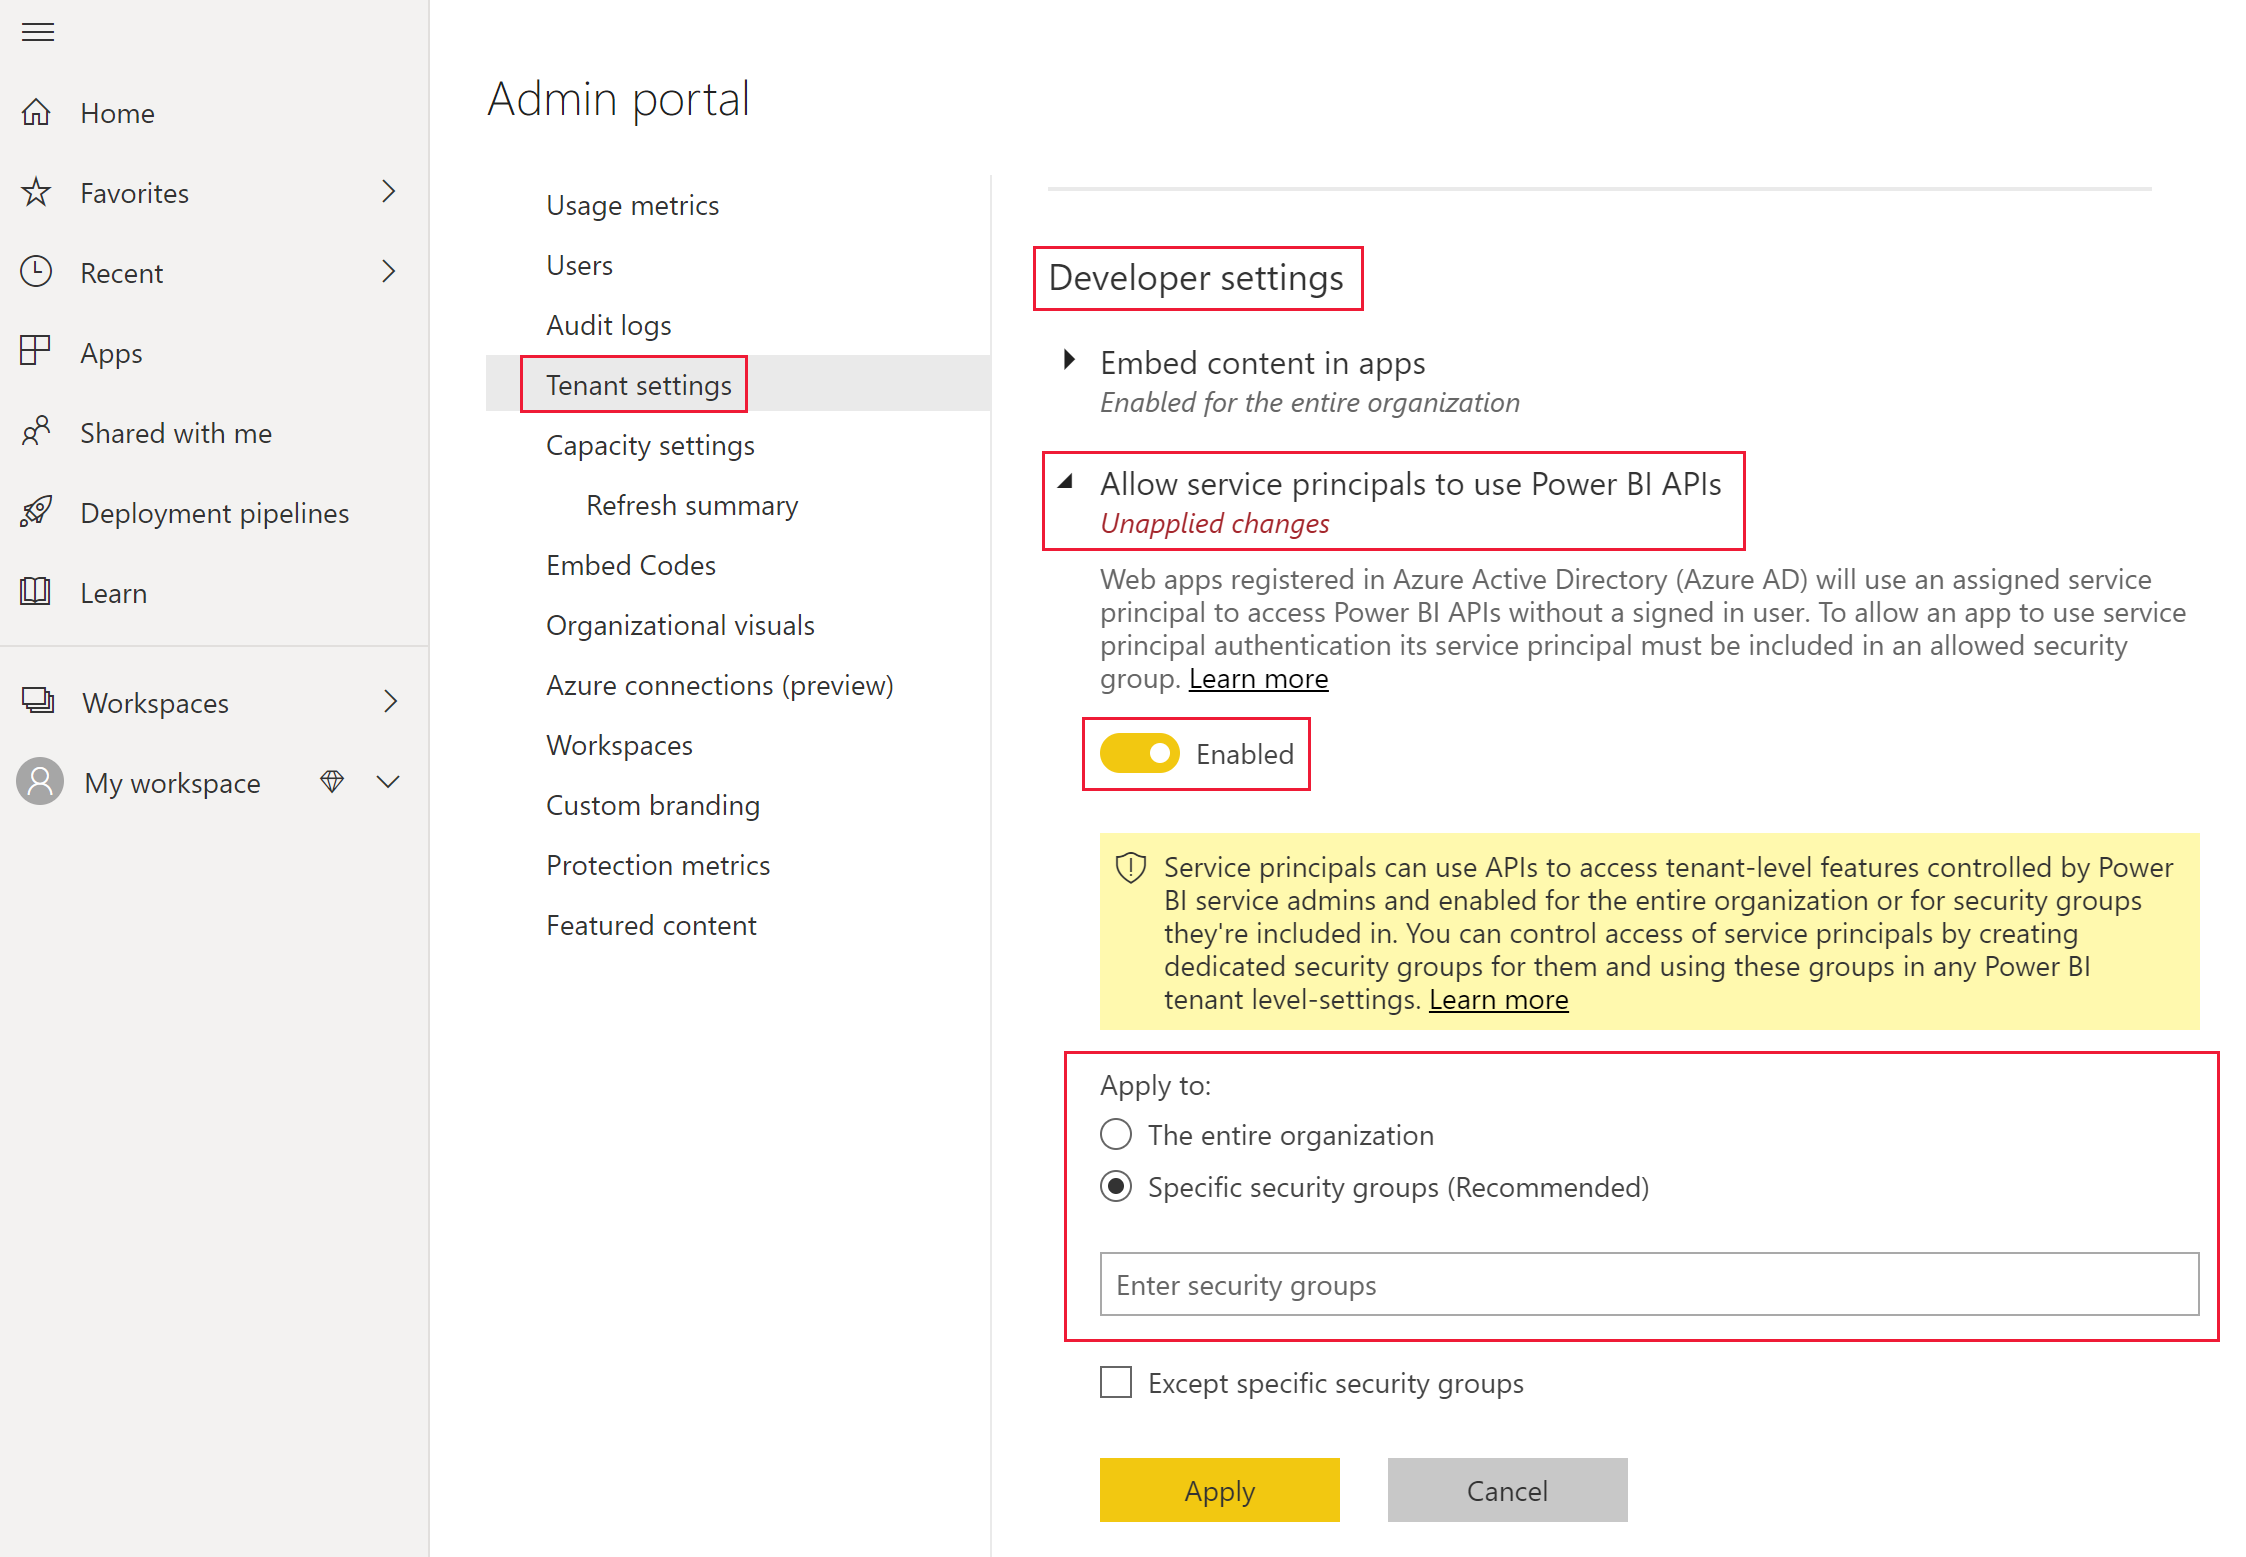 Screenshot showing the developer settings in the admin options in Power B I service.